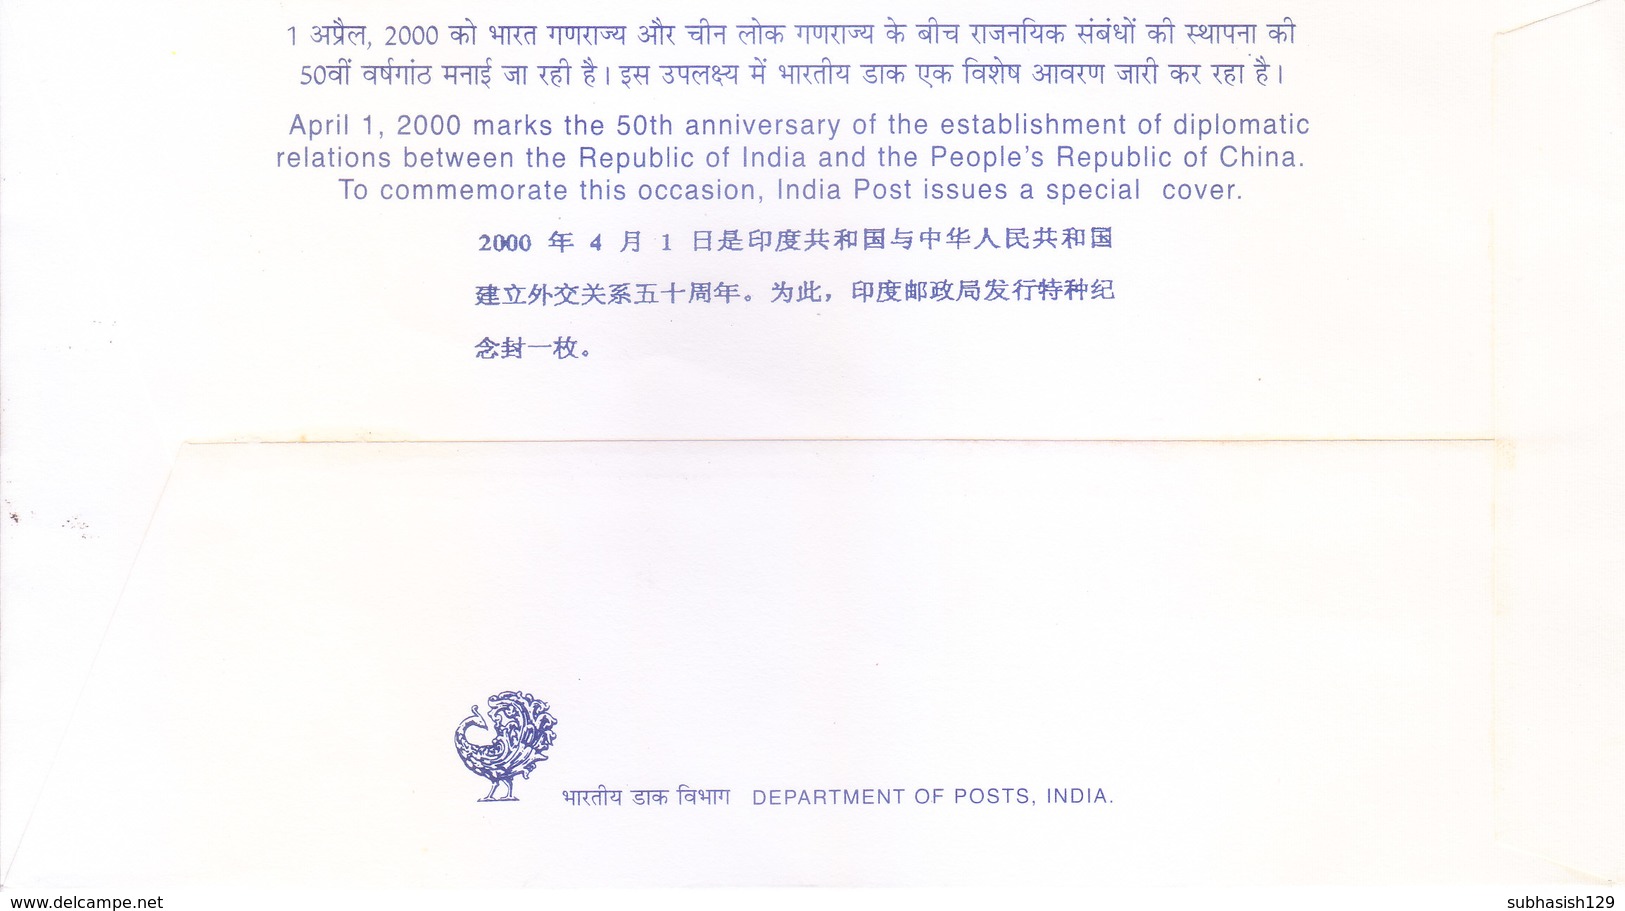 CHINA 01-04-2000 SPECIAL COVER - 50TH ANNIV. OF DIPLOMATIC RELATIONS BETWEEN INDIA AND CHINA - WITH INDIAN SPECIAL CANC. - Covers & Documents